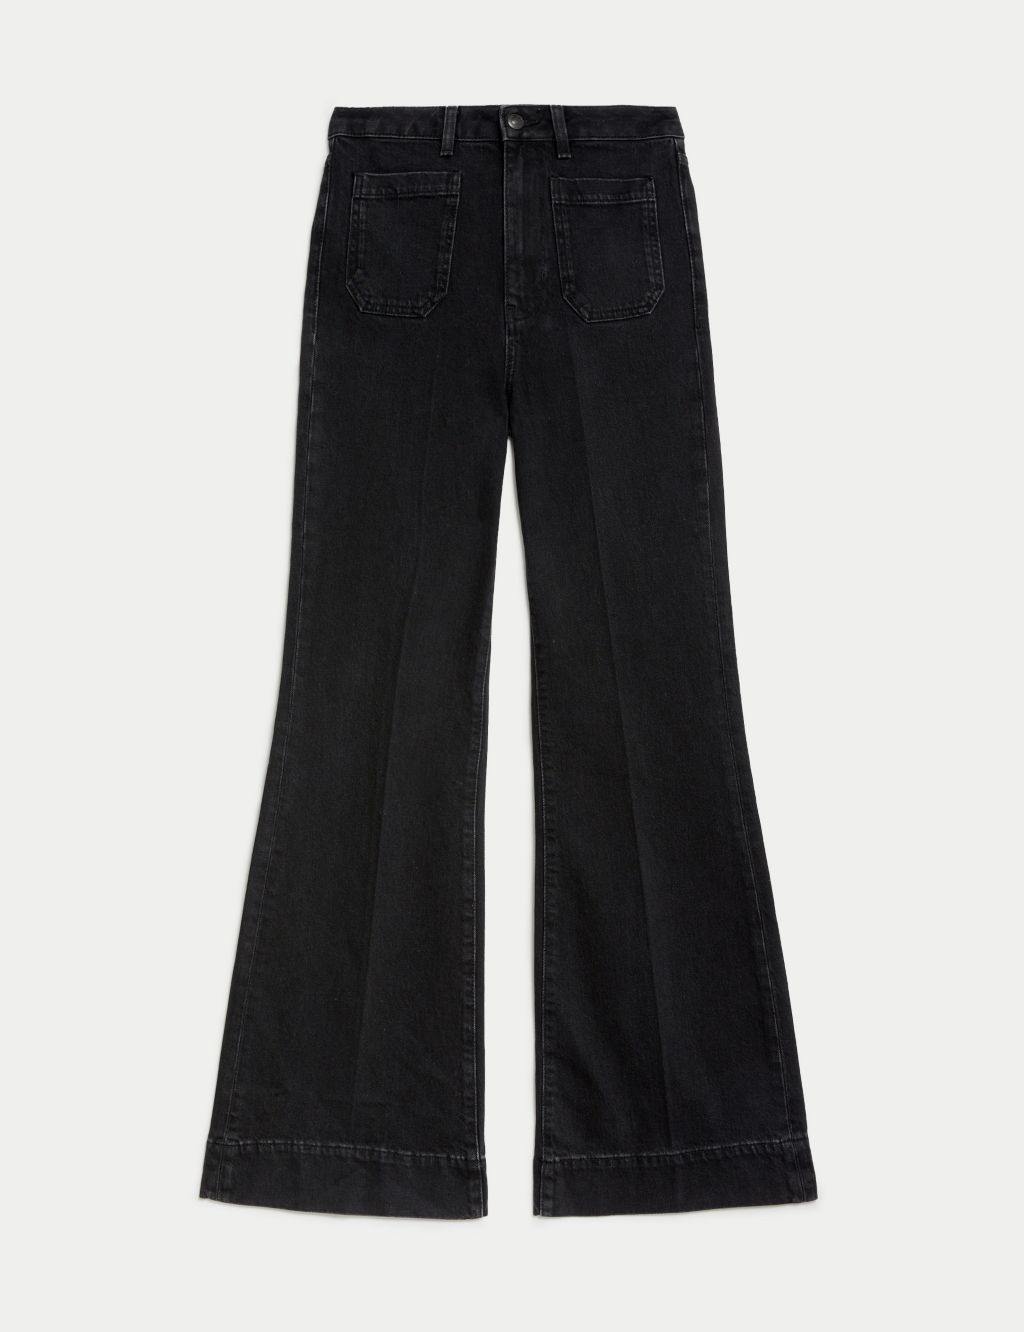 Patch Pocket Flare High Waisted Jeans | M&S Collection | M&S